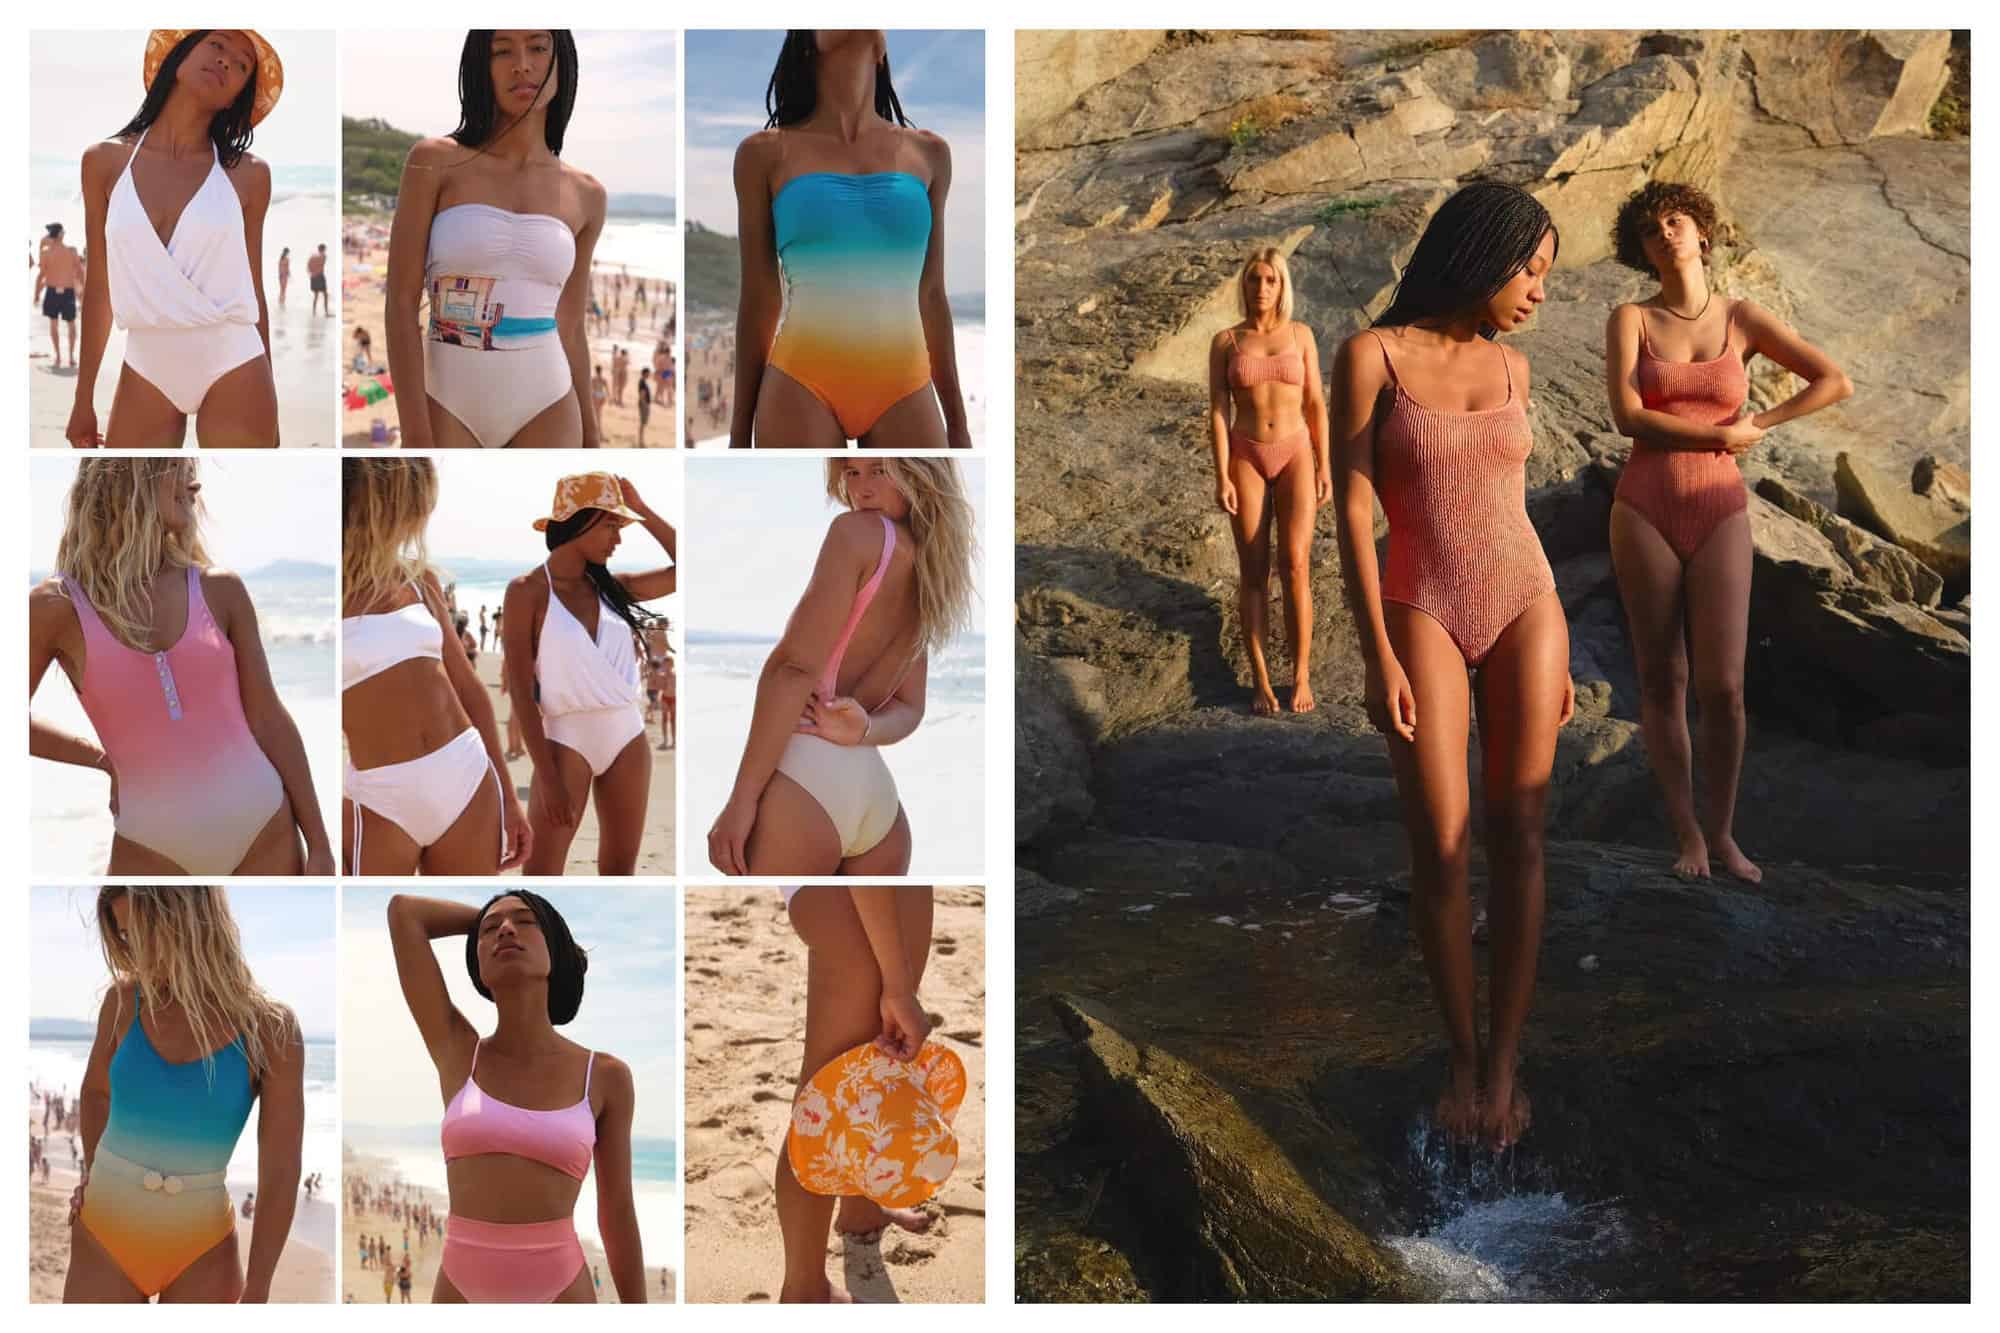 Left: 9 images of women on the beach wearing different swimsuits by Albertine. Right: Three women wearing the same colored swimsuit by Albertine standing on rocks. Two are wearing a one-piece and one is wearing a bikini.